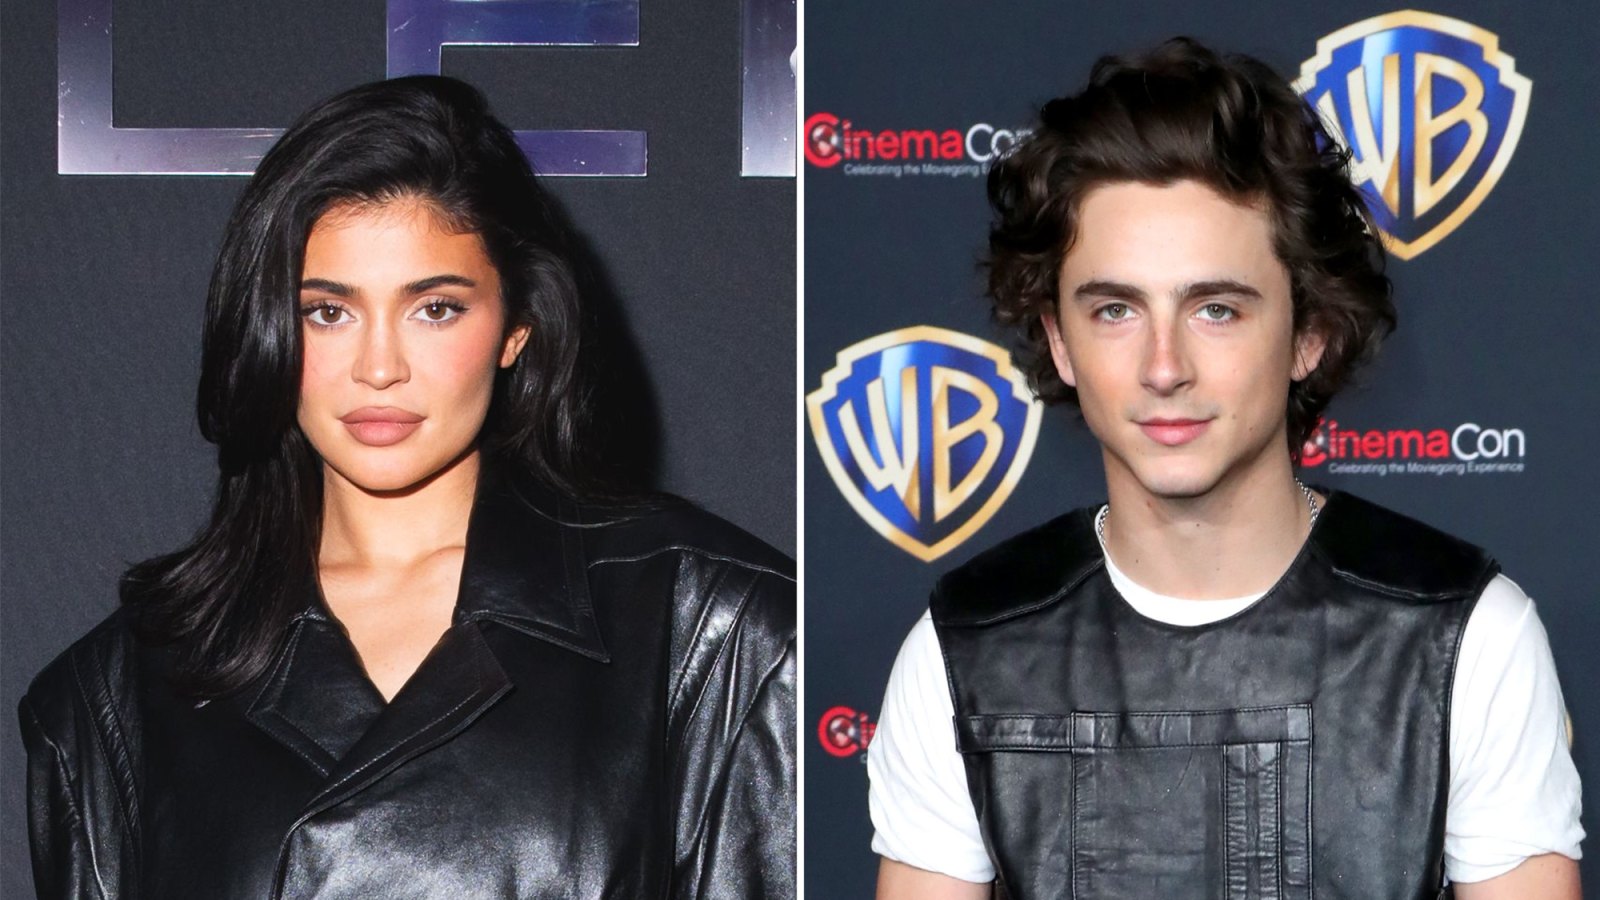 Kylie Jenner and Timothee Chalamet Spotted Together for the 1st Time Amid New Romance